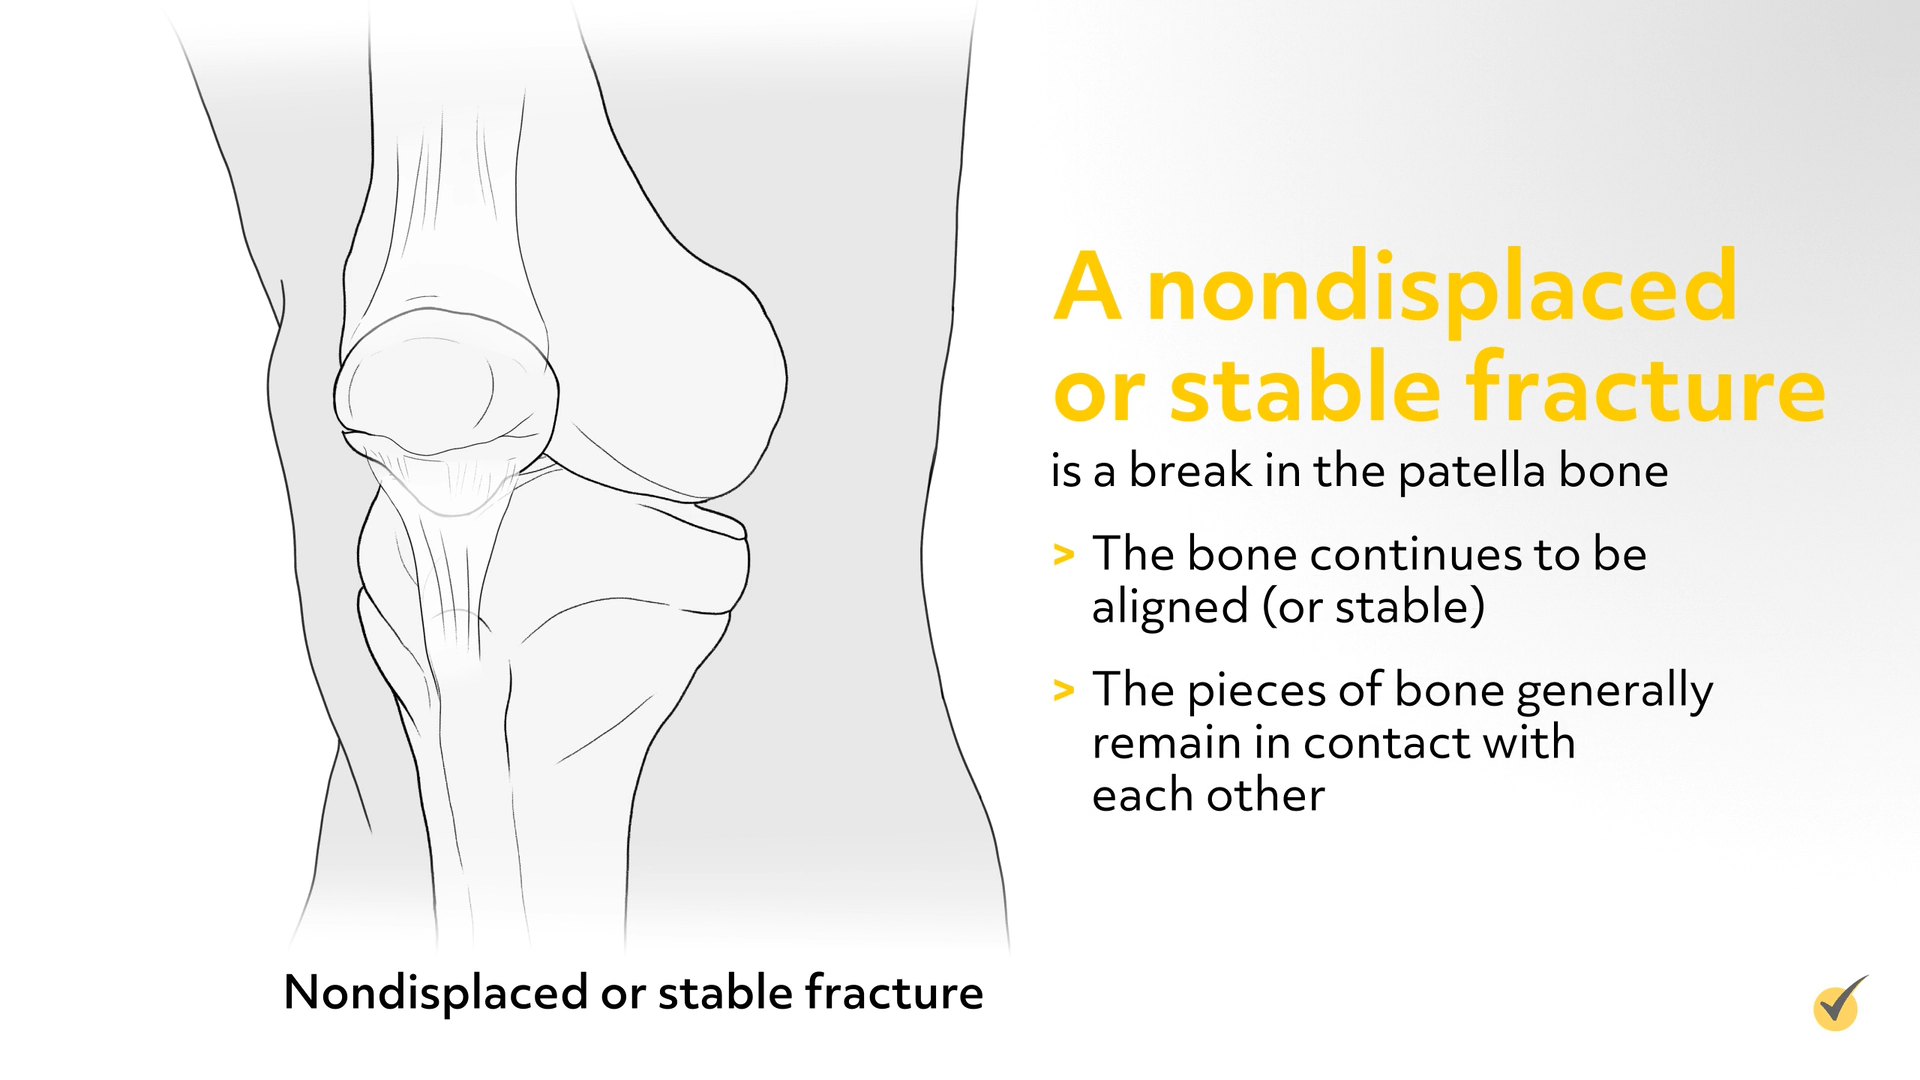 Image of a nondisplaced or stable patellar fracture. The bone is still stable with the pieces of the bone intact.